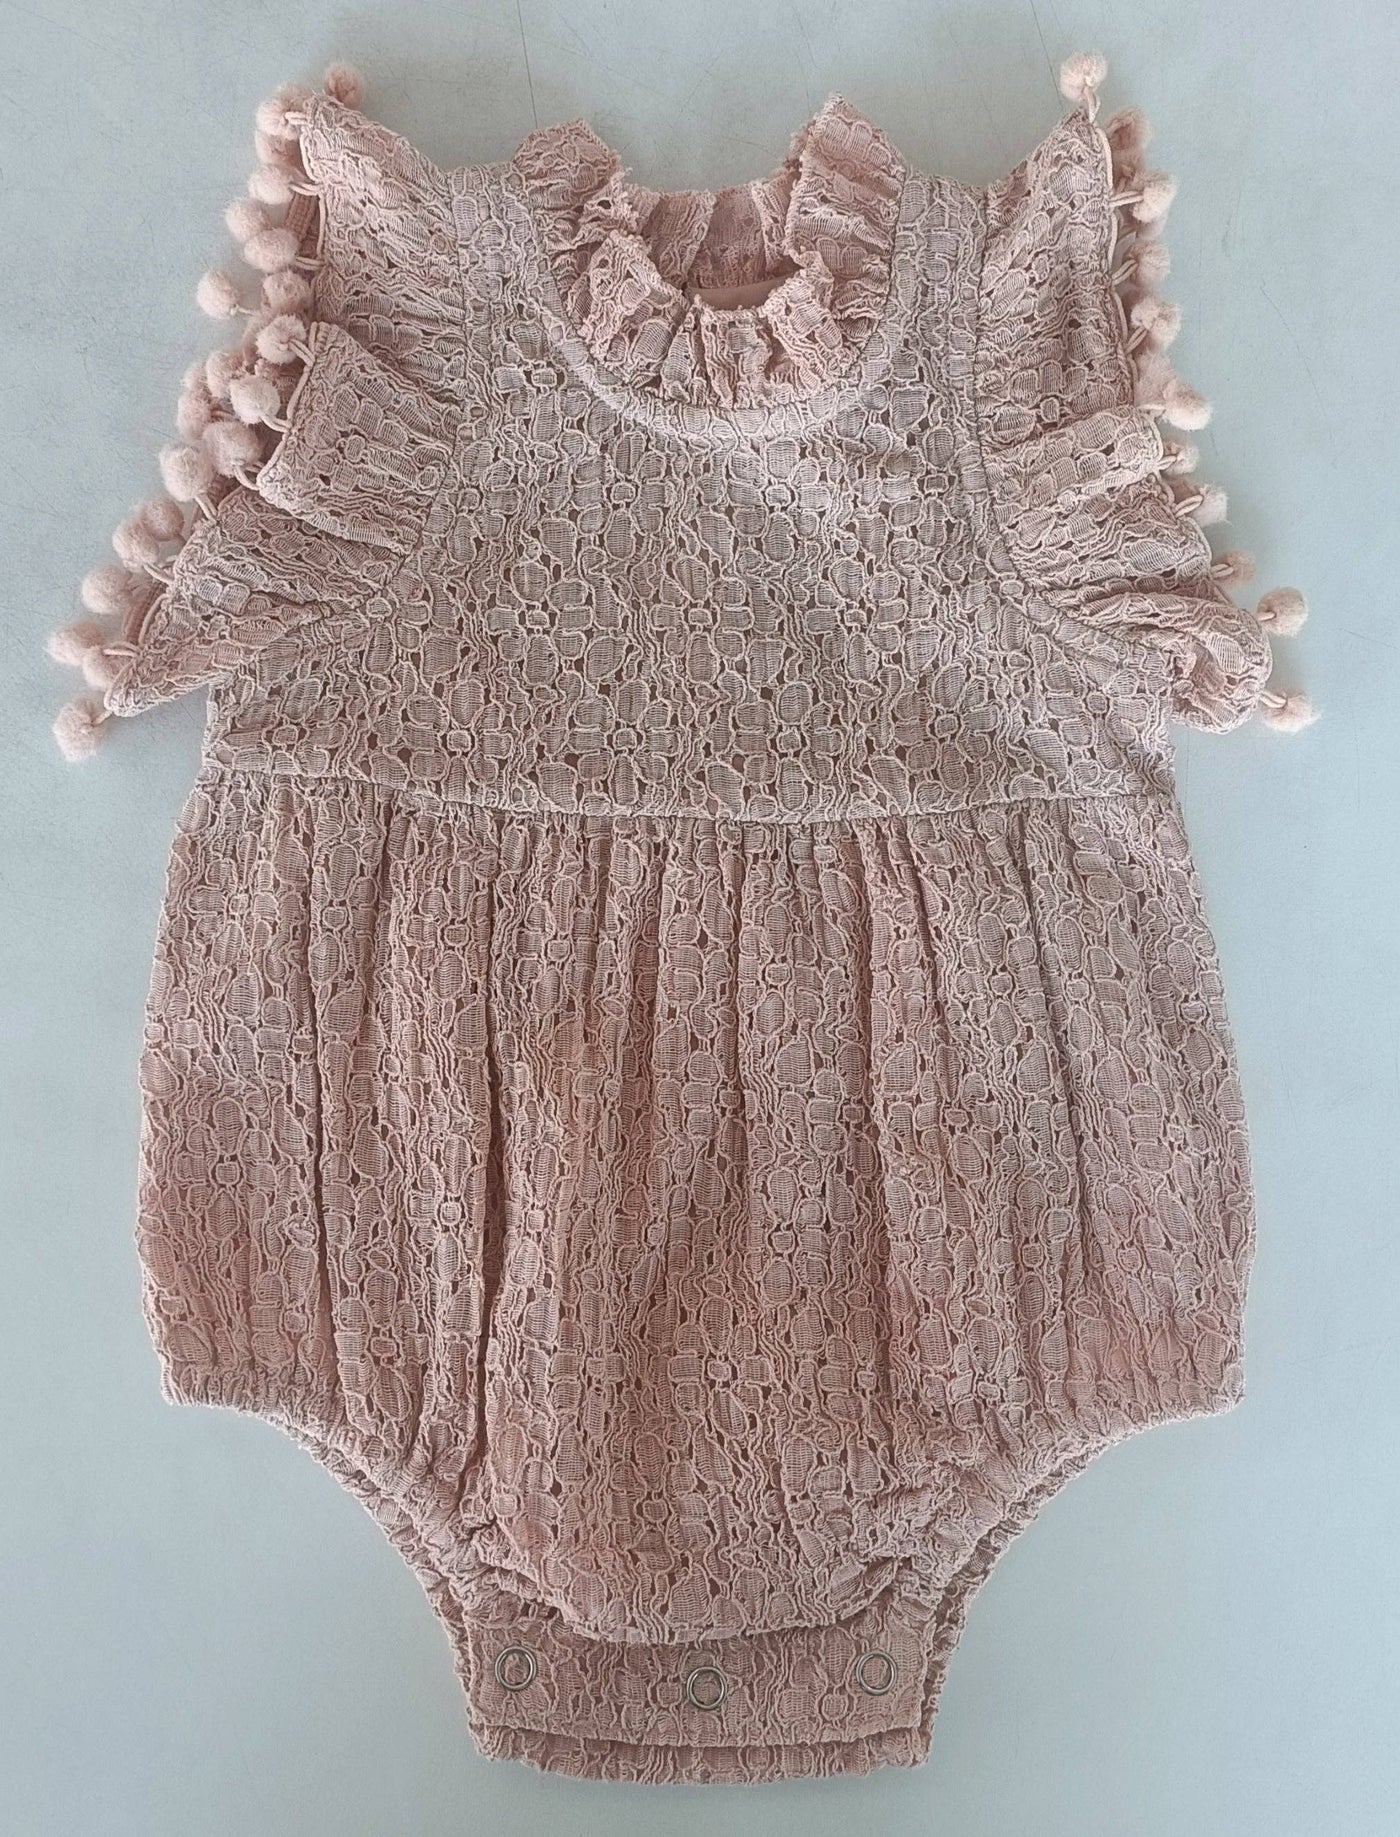 Blush Solid Color Sleeve & Neck Ruffle Pom-Pom Lace Baby Romper